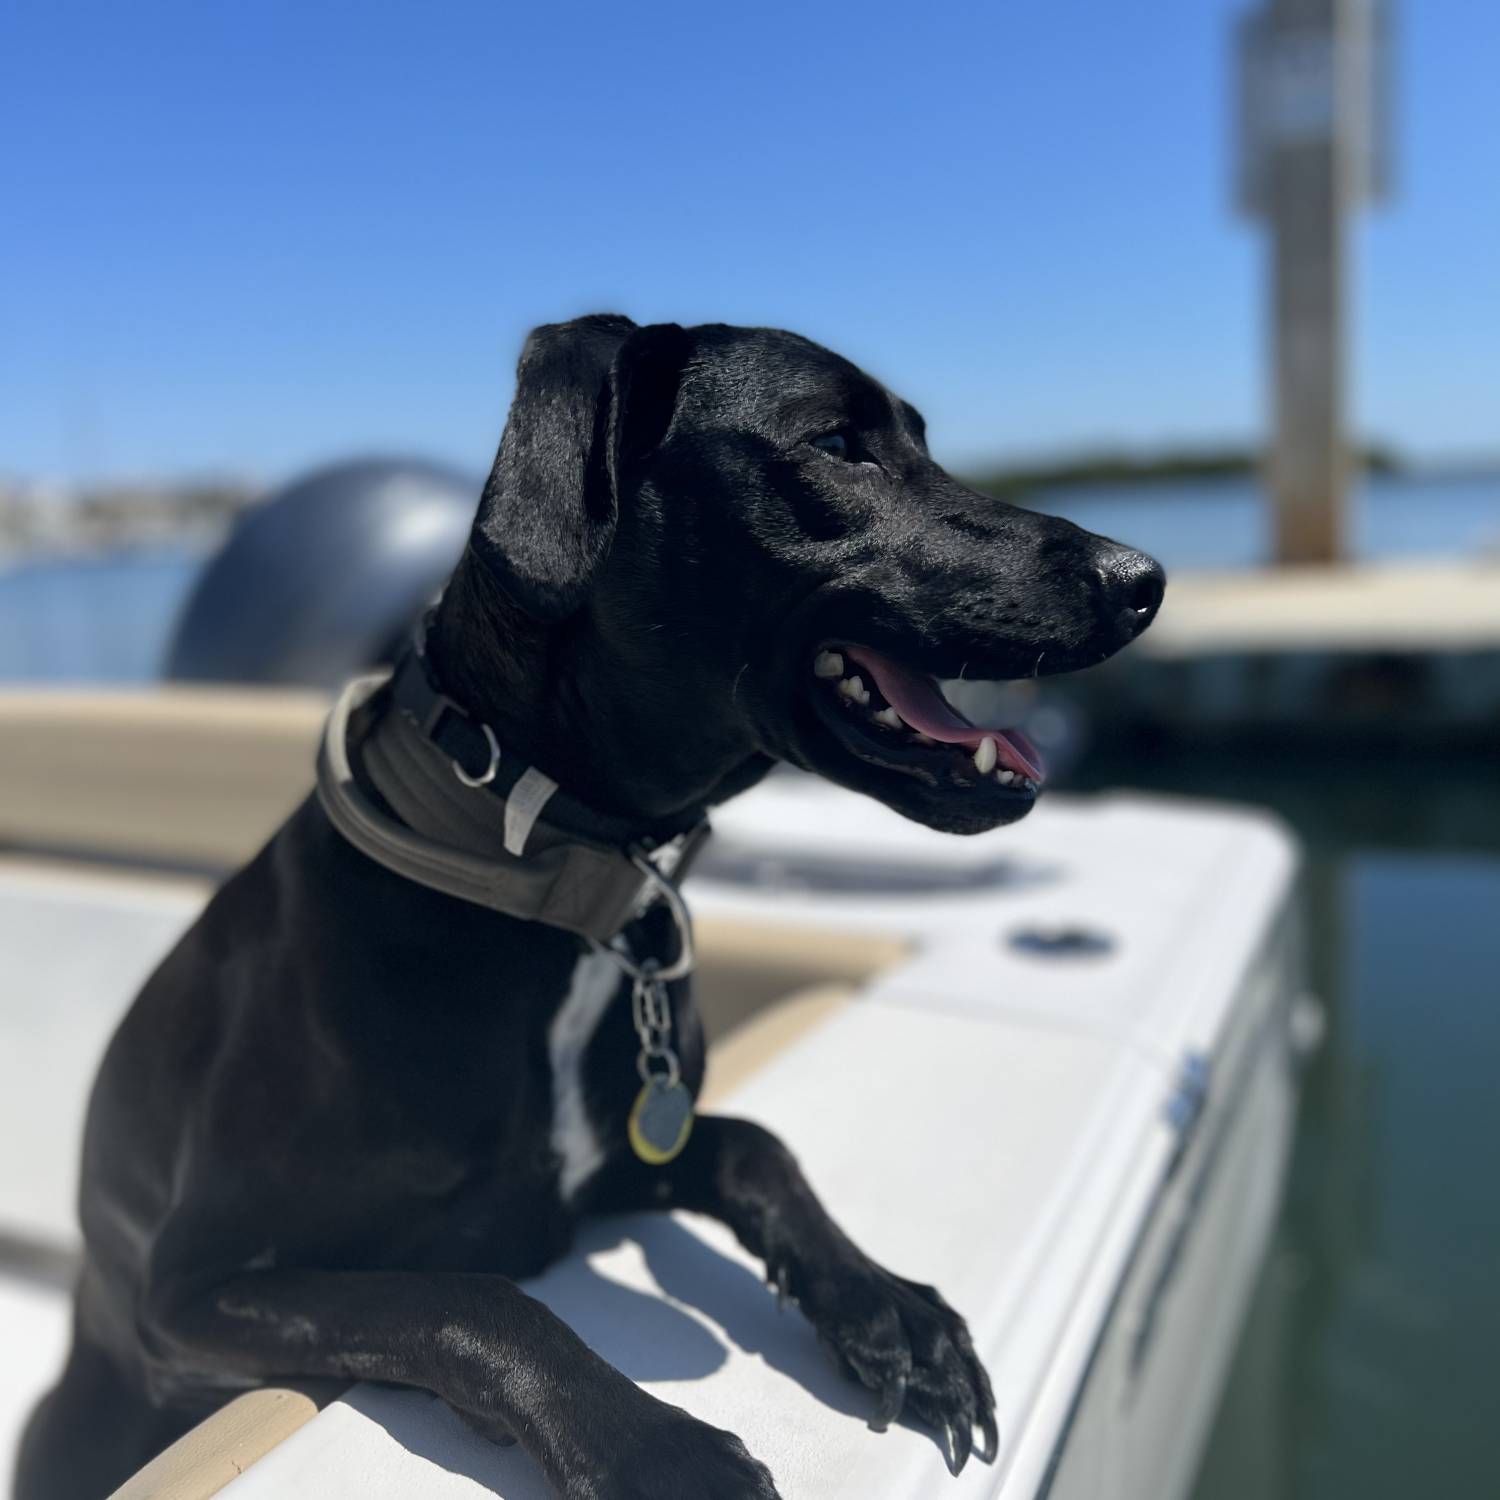 Couldn’t be happier to cruise on the boat with the wind in his ears